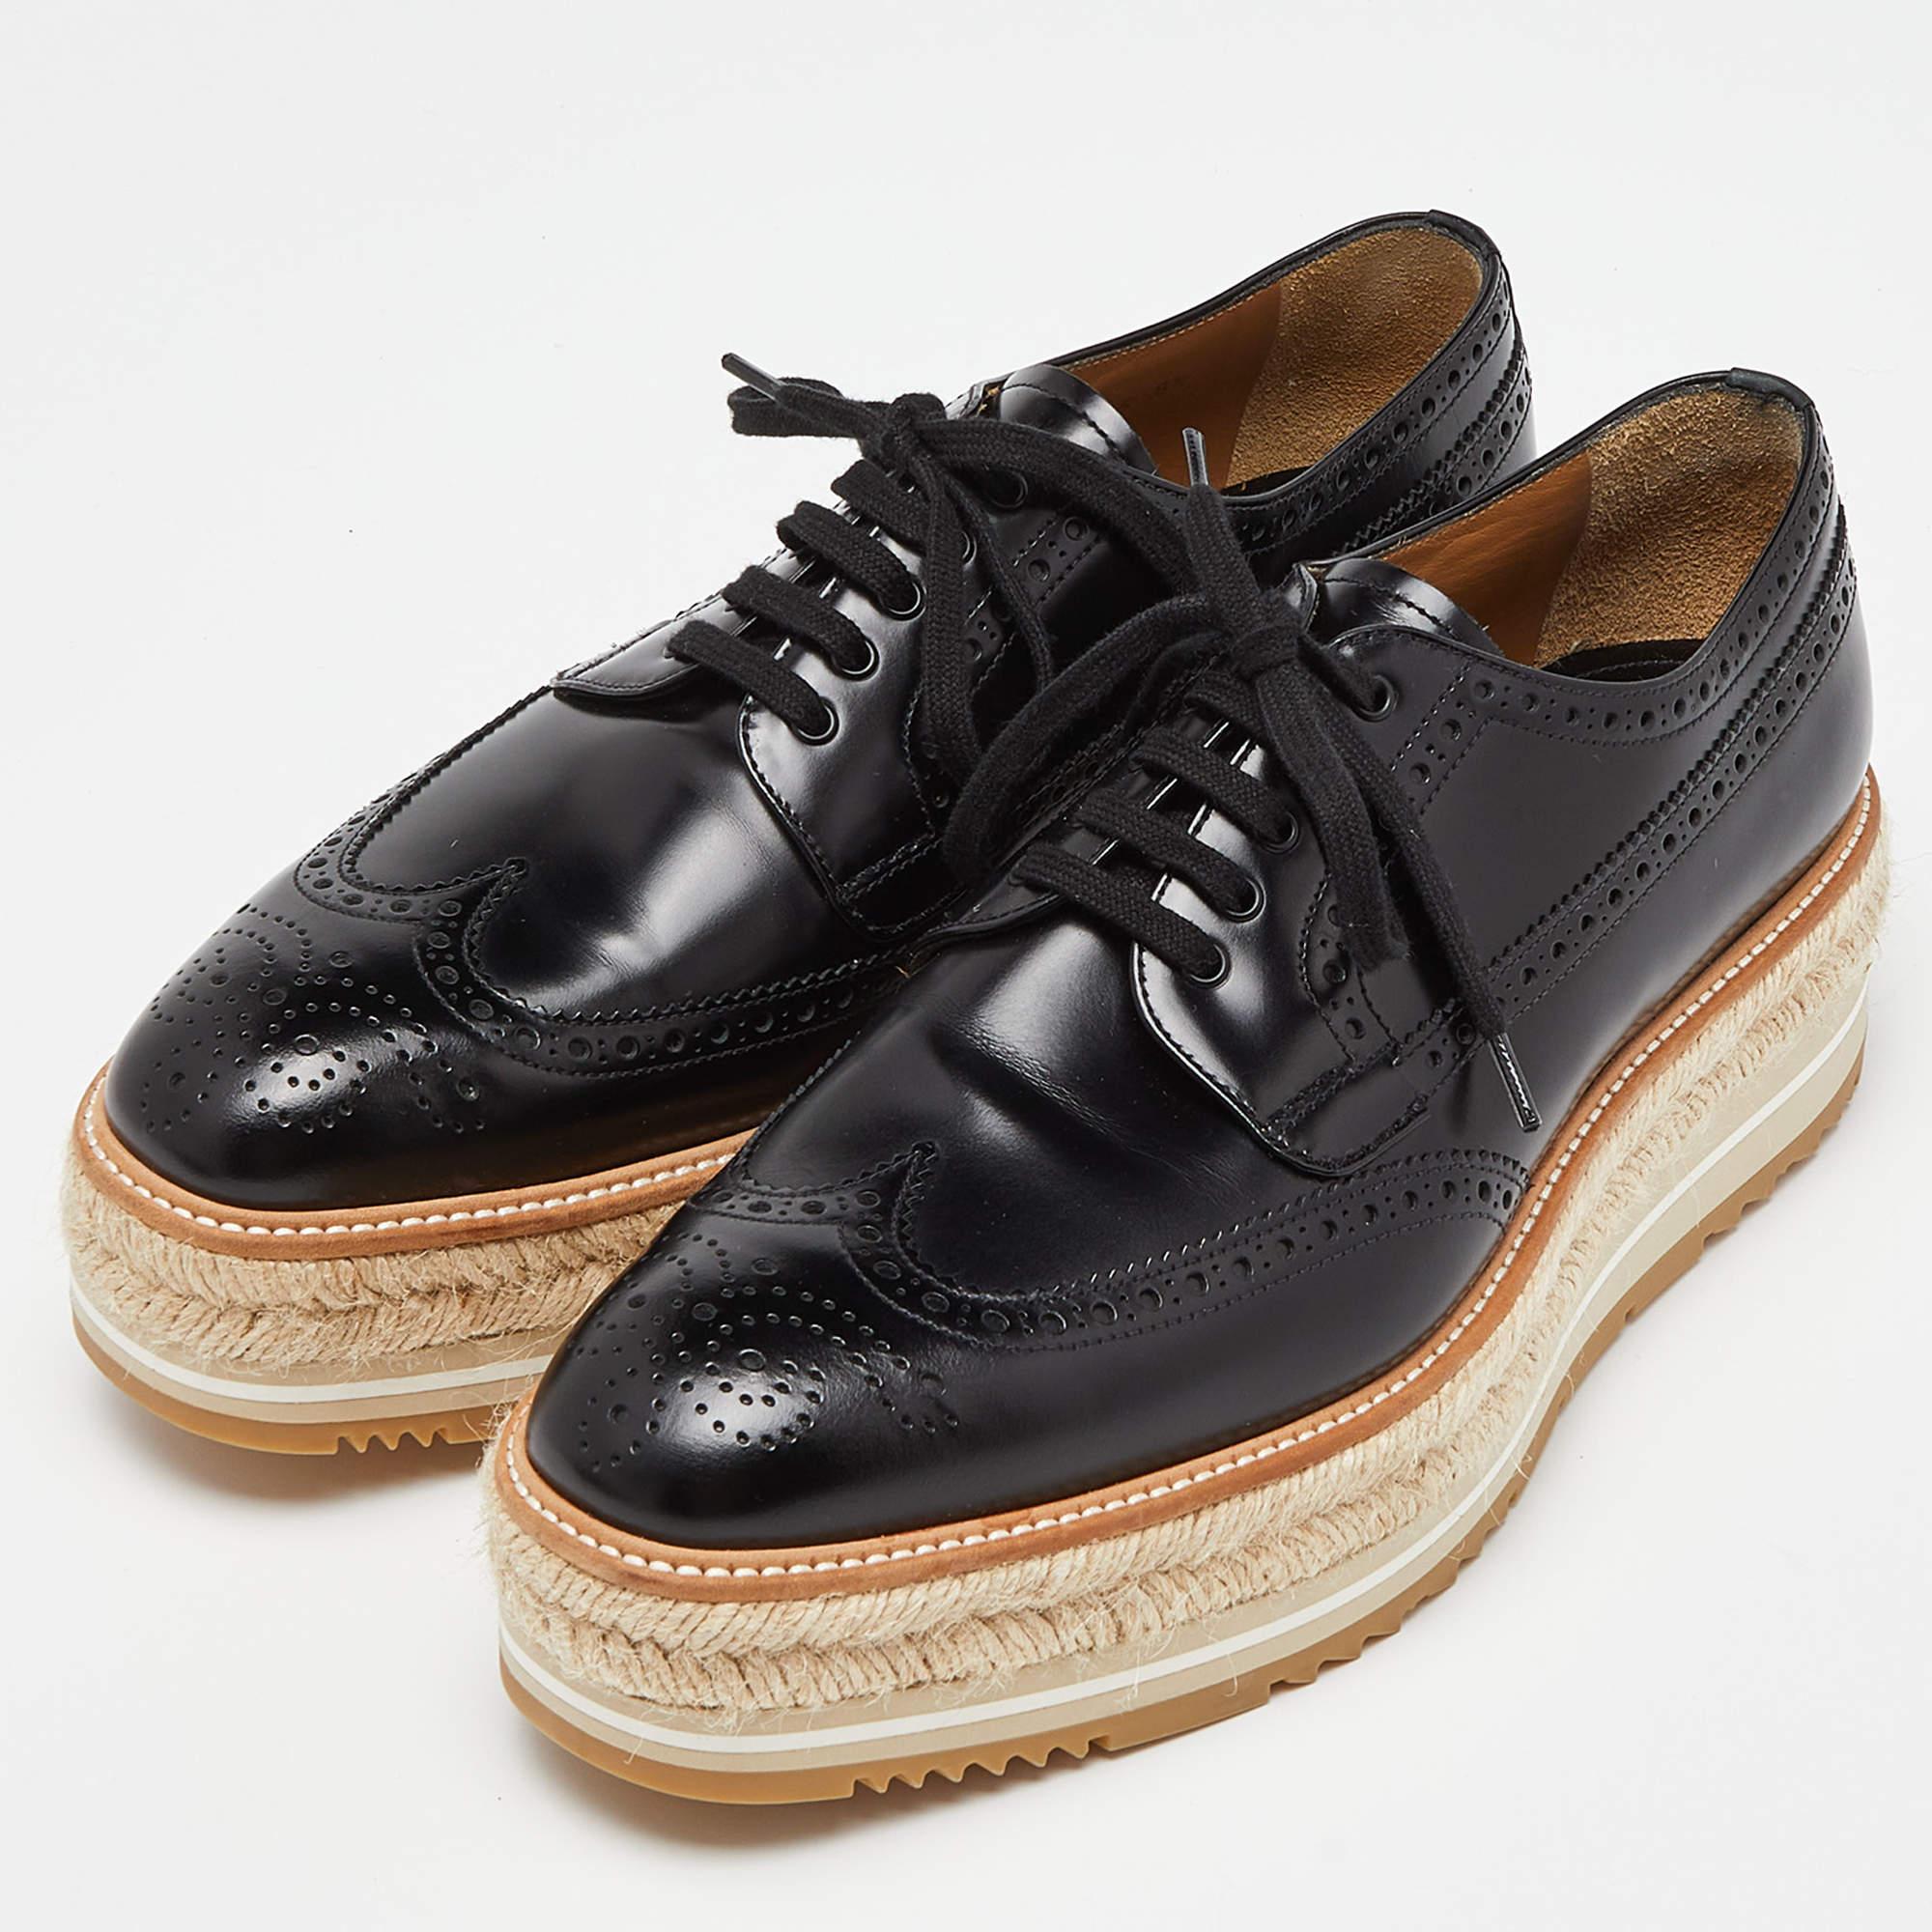 These sneakers are not just stylish, but also comfortable and easy to wear. This black pair of Prada espadrilles will accompany a casual outfit with perfection. They are made of brogue leather and detailed with laces and espadrille detailing.

